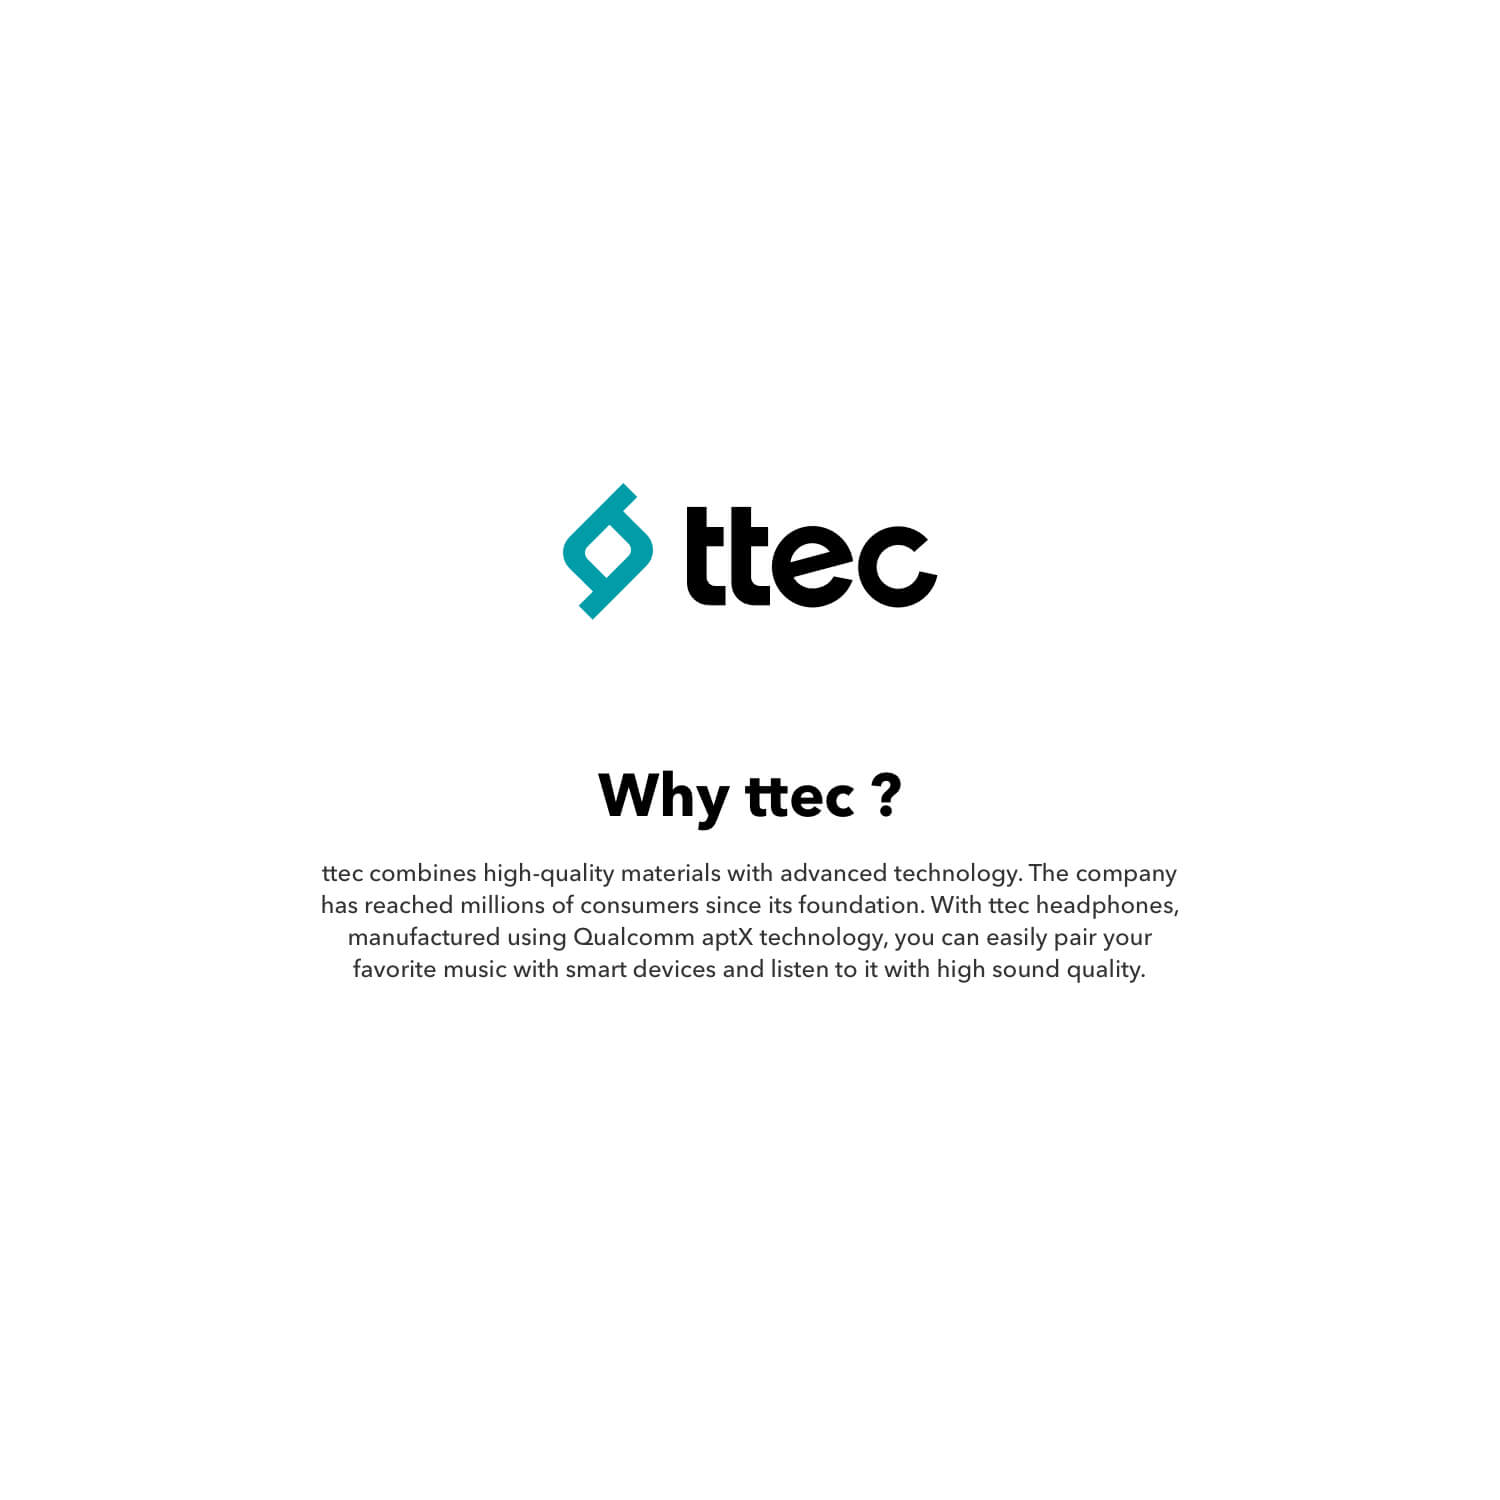 Why ttec